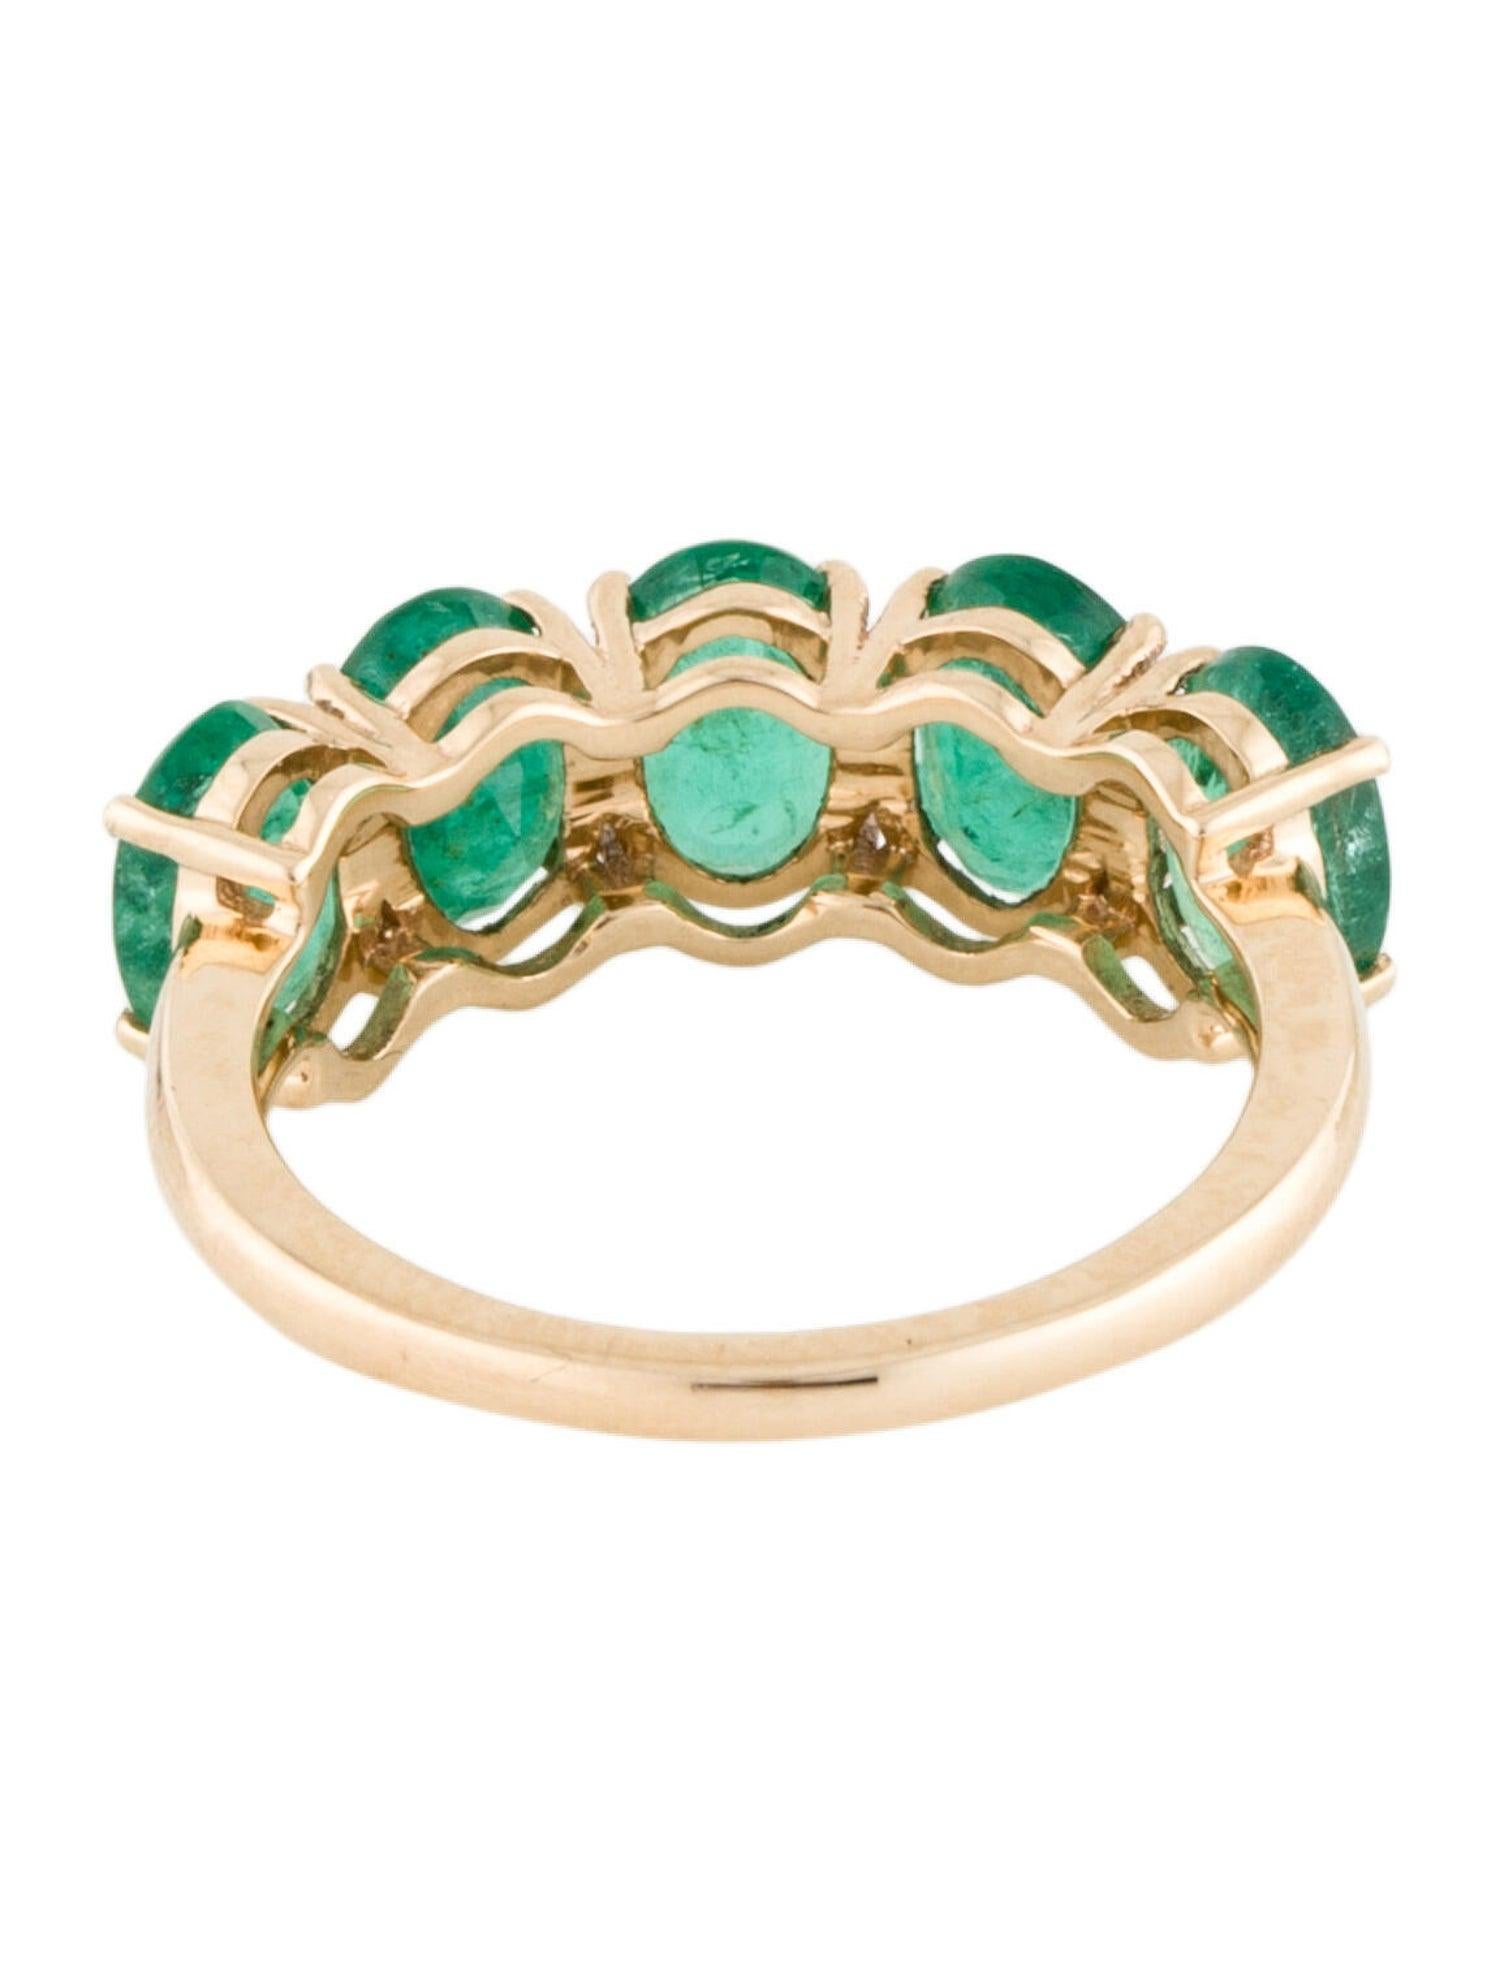 Brilliant Cut 14K Emerald Band - Size 6.75 - Timeless Elegance, Luxury Jewelry Statement Ring For Sale